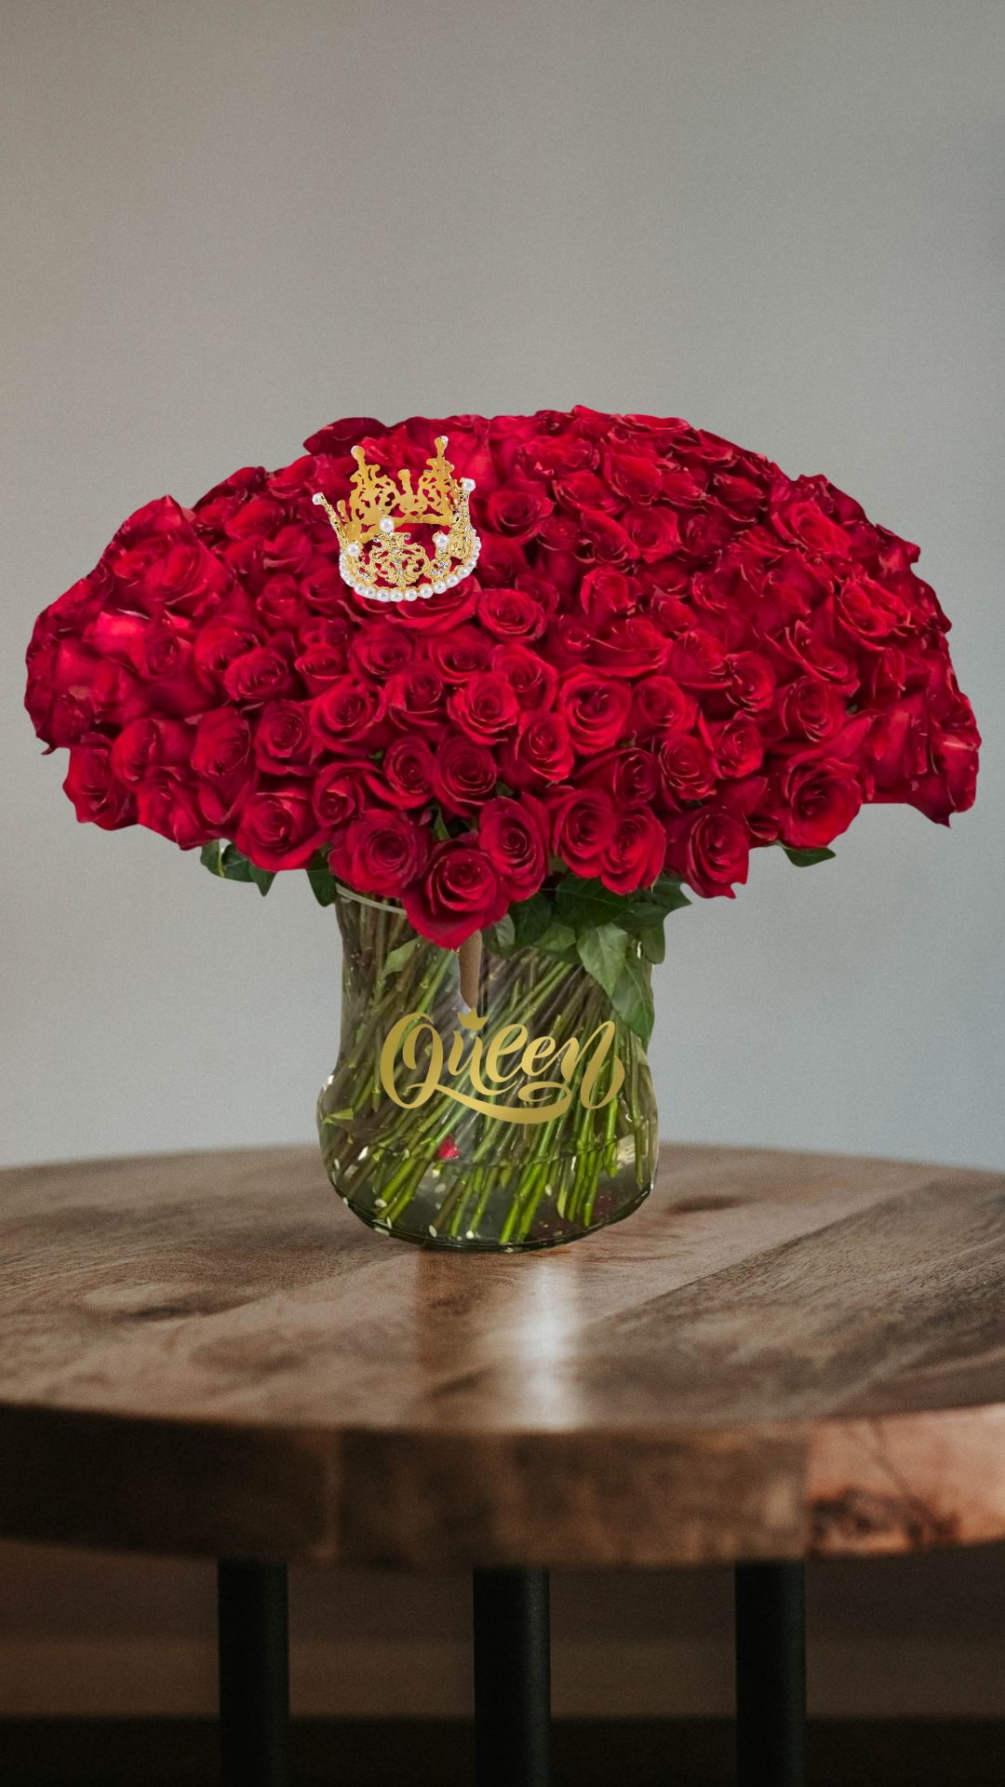 100 Premium Gorgeous Red Roses, Topped With A Crown meant For A